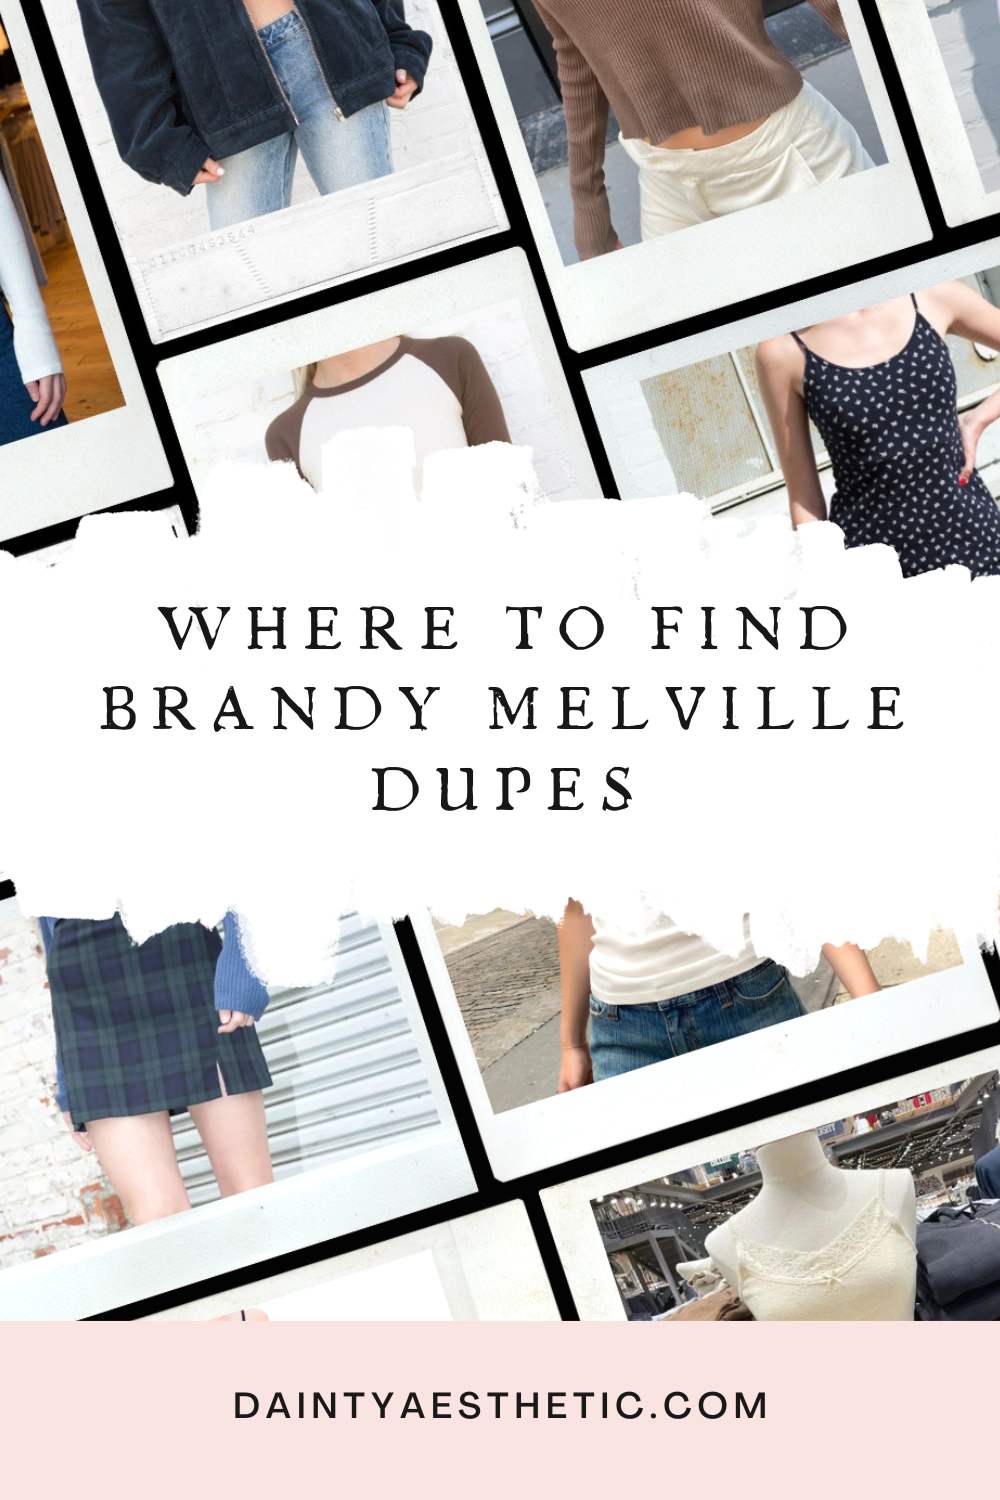 Where to find brandy melville dupes title with some fashion items